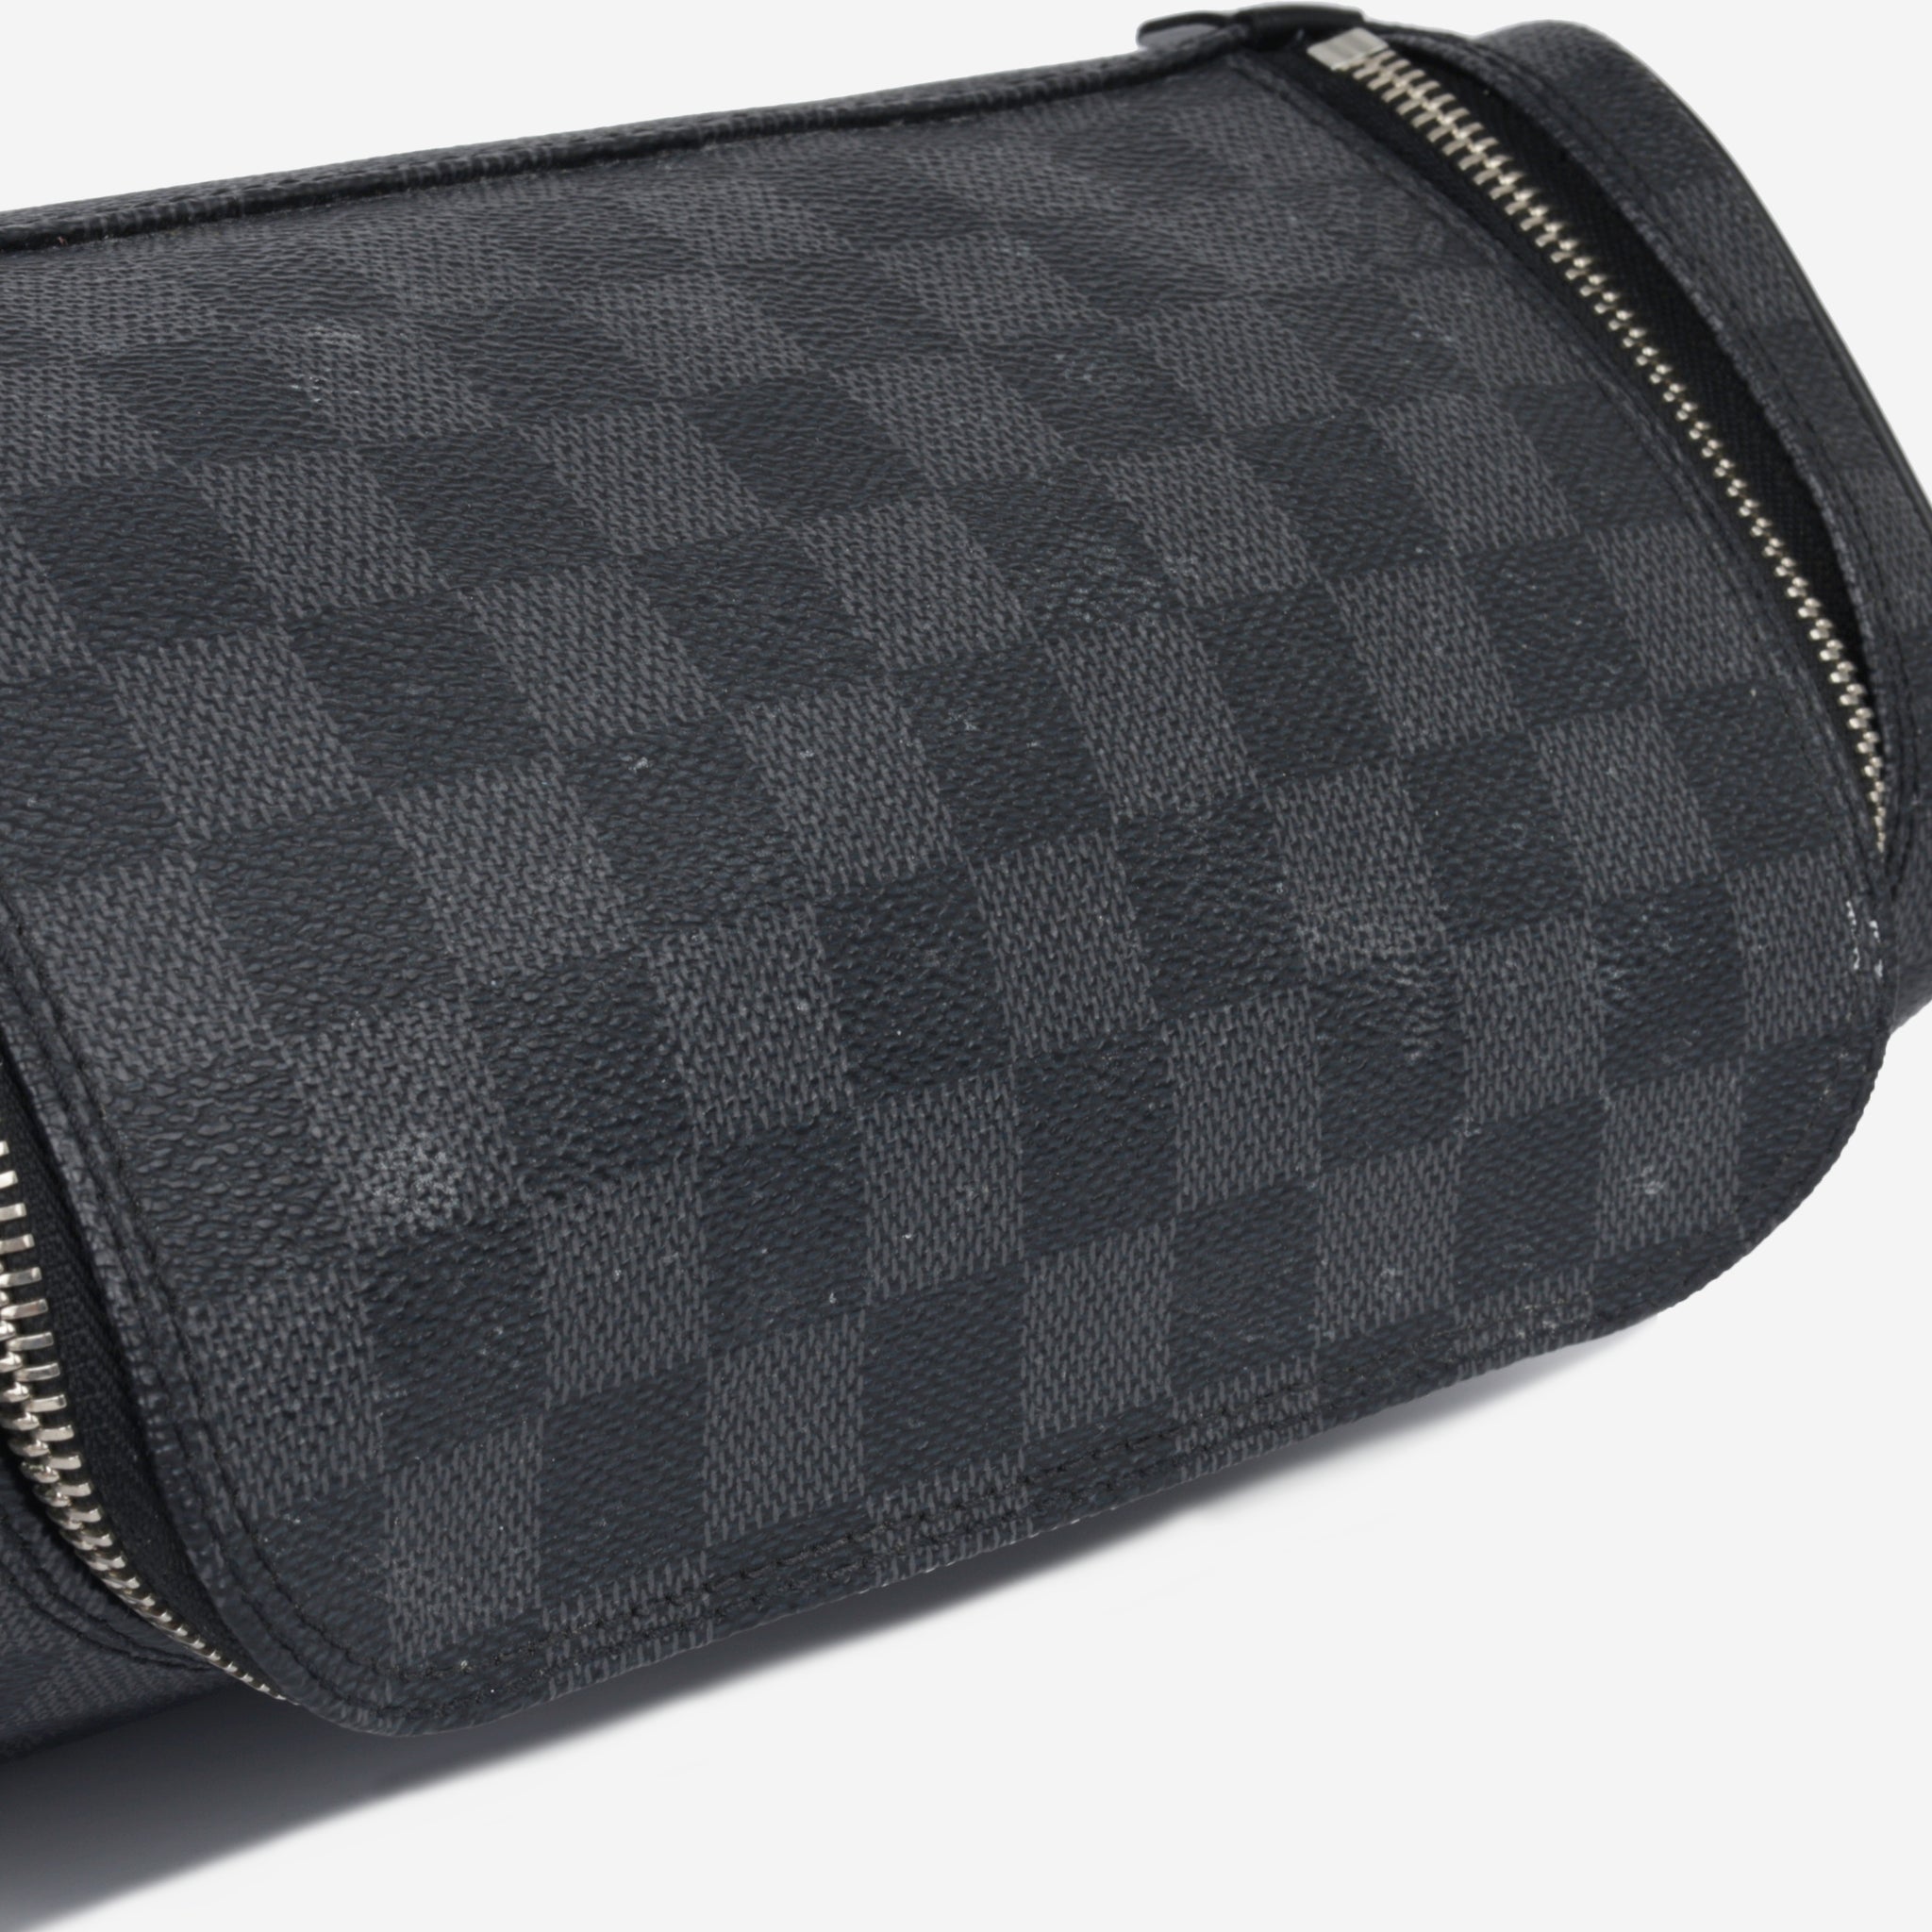 Louis Vuitton - Toiletry Pouch - Travel - Damier Graphite - SHW - Pre Loved